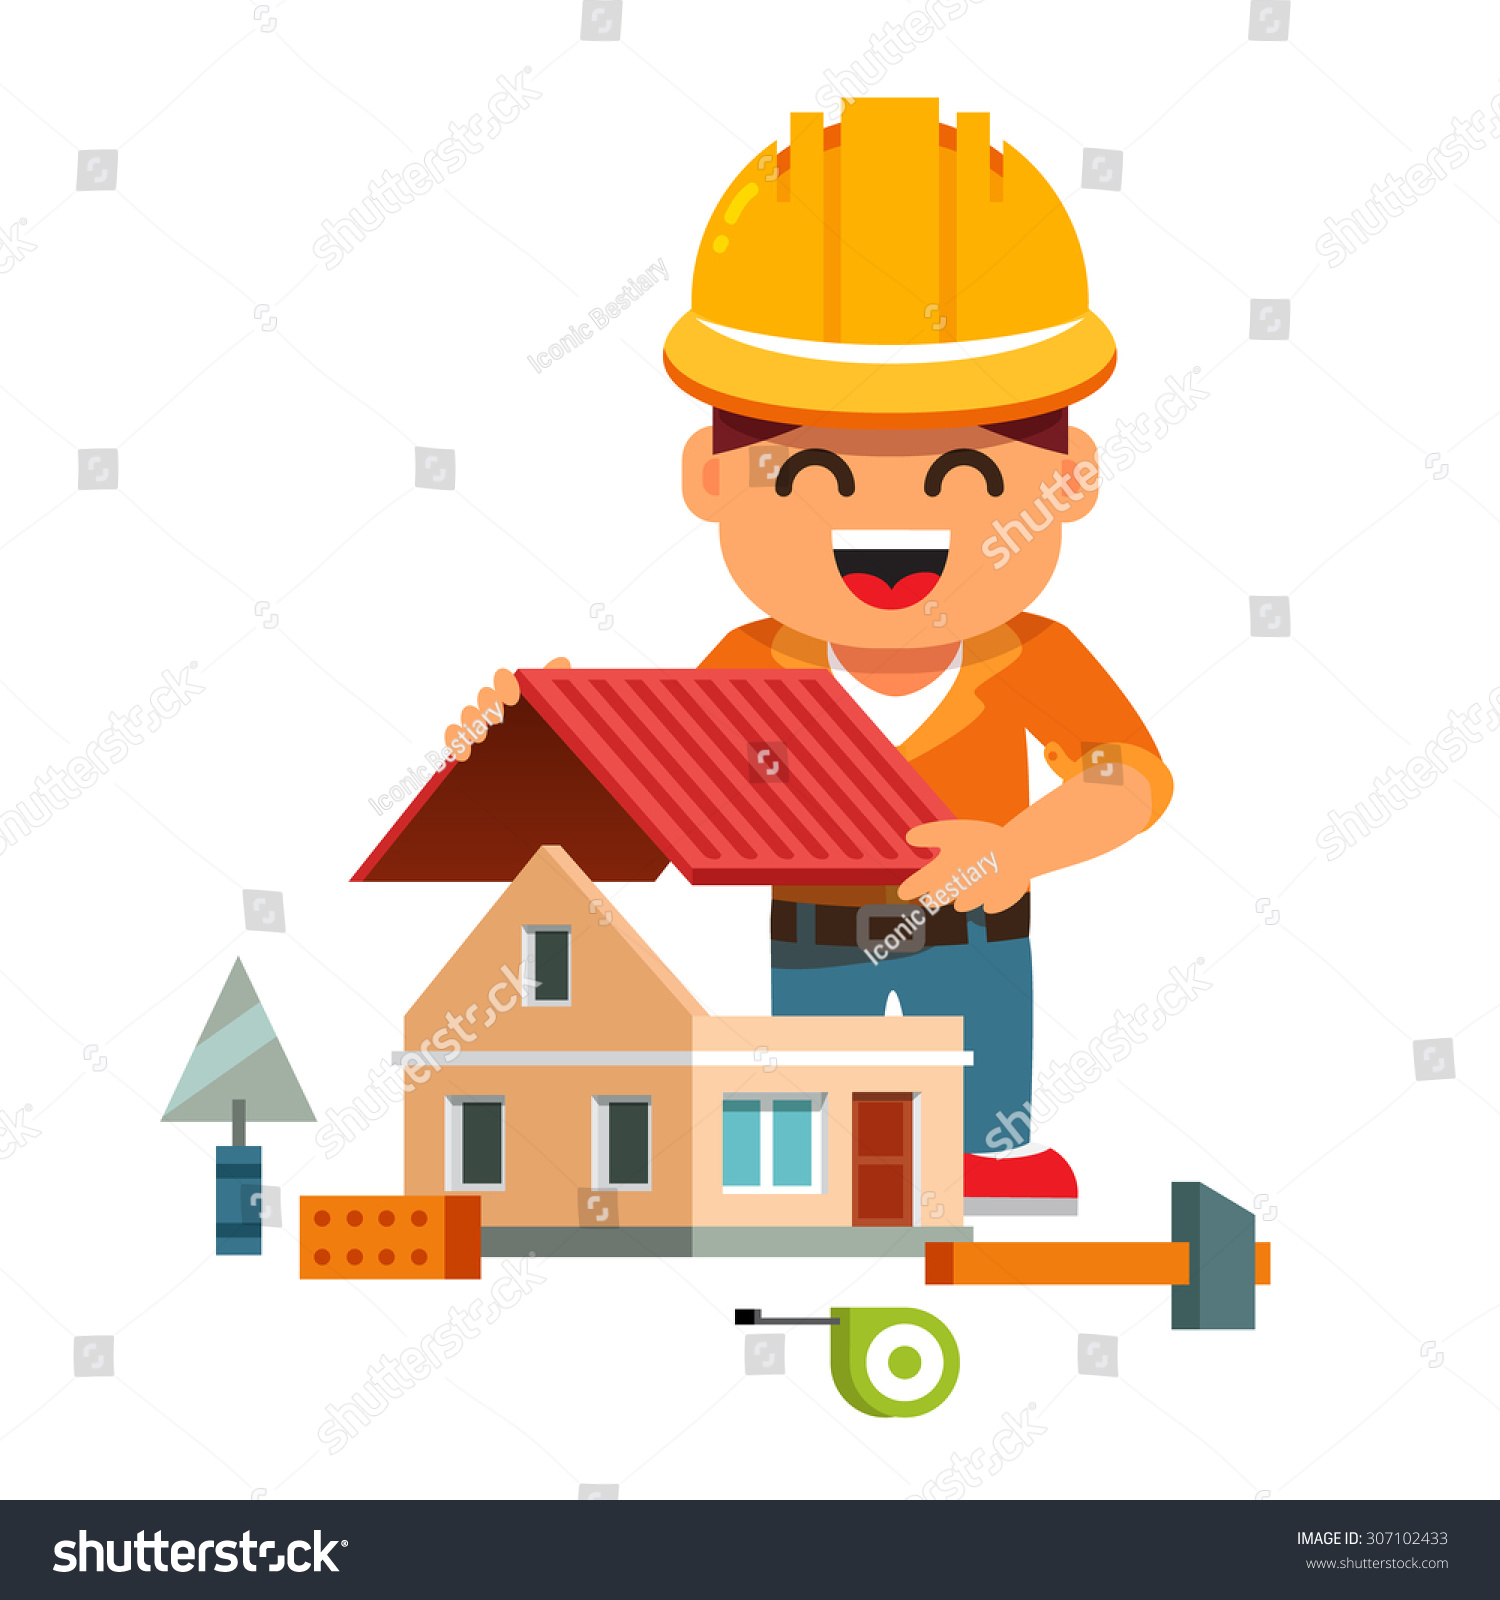 clip art for home builders - photo #20